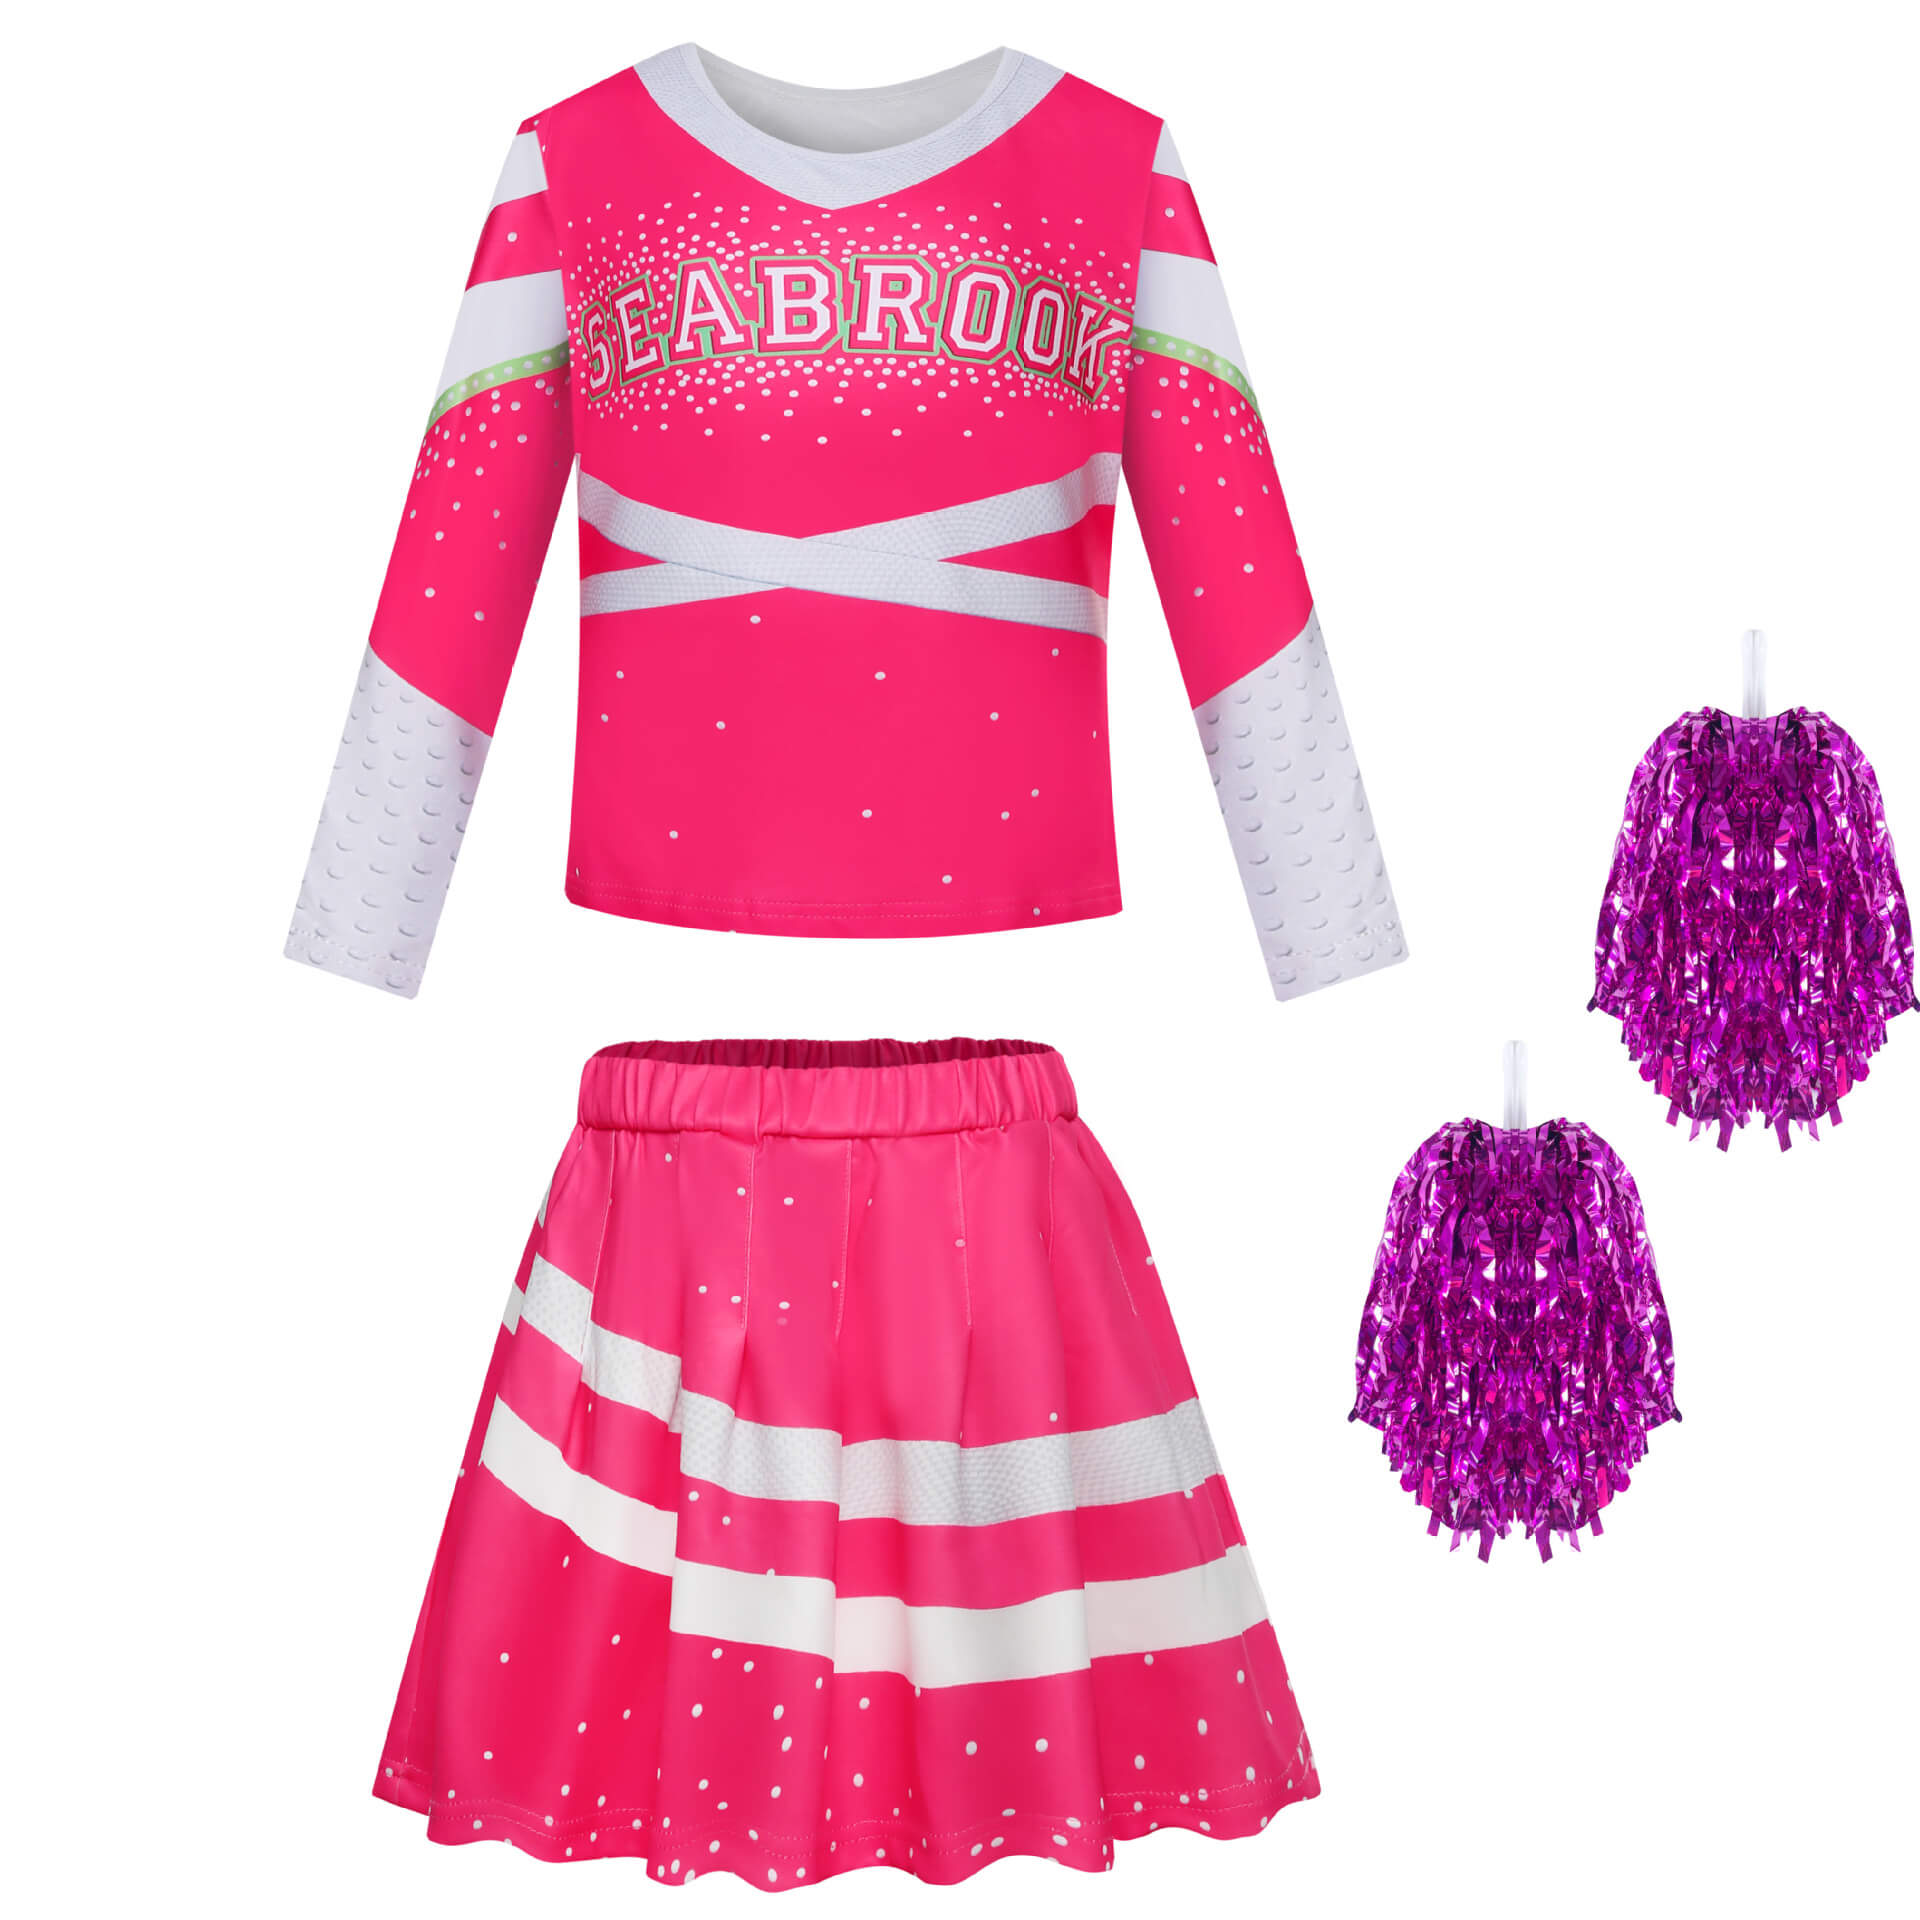 Zombies Girls Adult Cheerleader Costumes Cosplay Dress Up Outfit Sweatshirt Skirt and Pom Poms